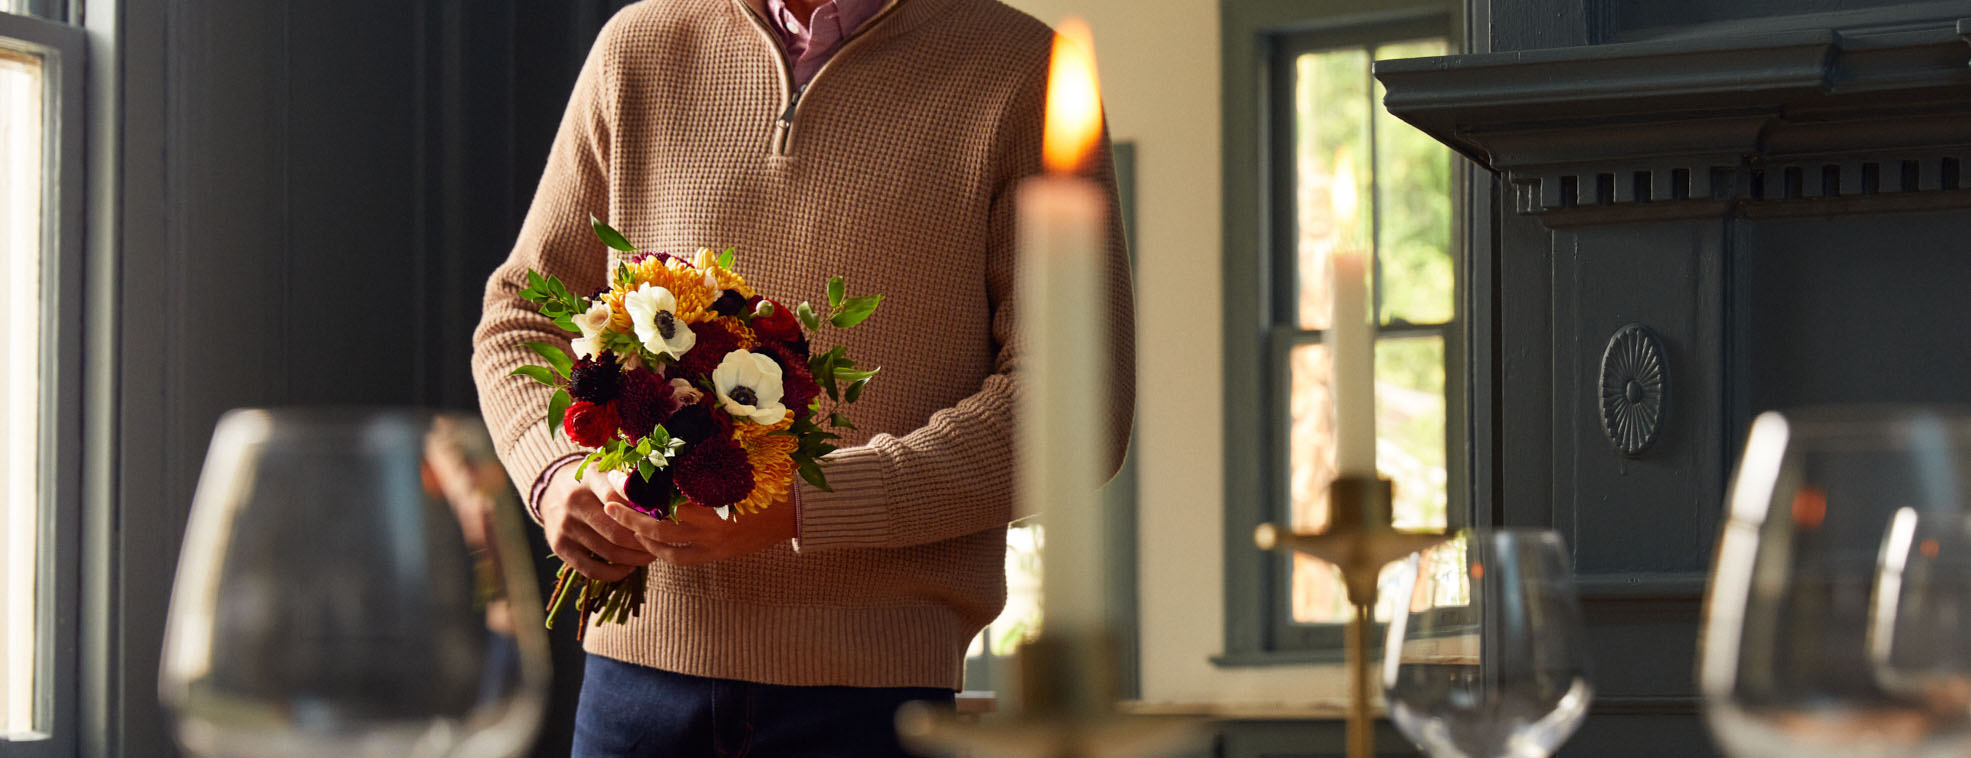 Man holding a bouquet of mum flowers for entertaining